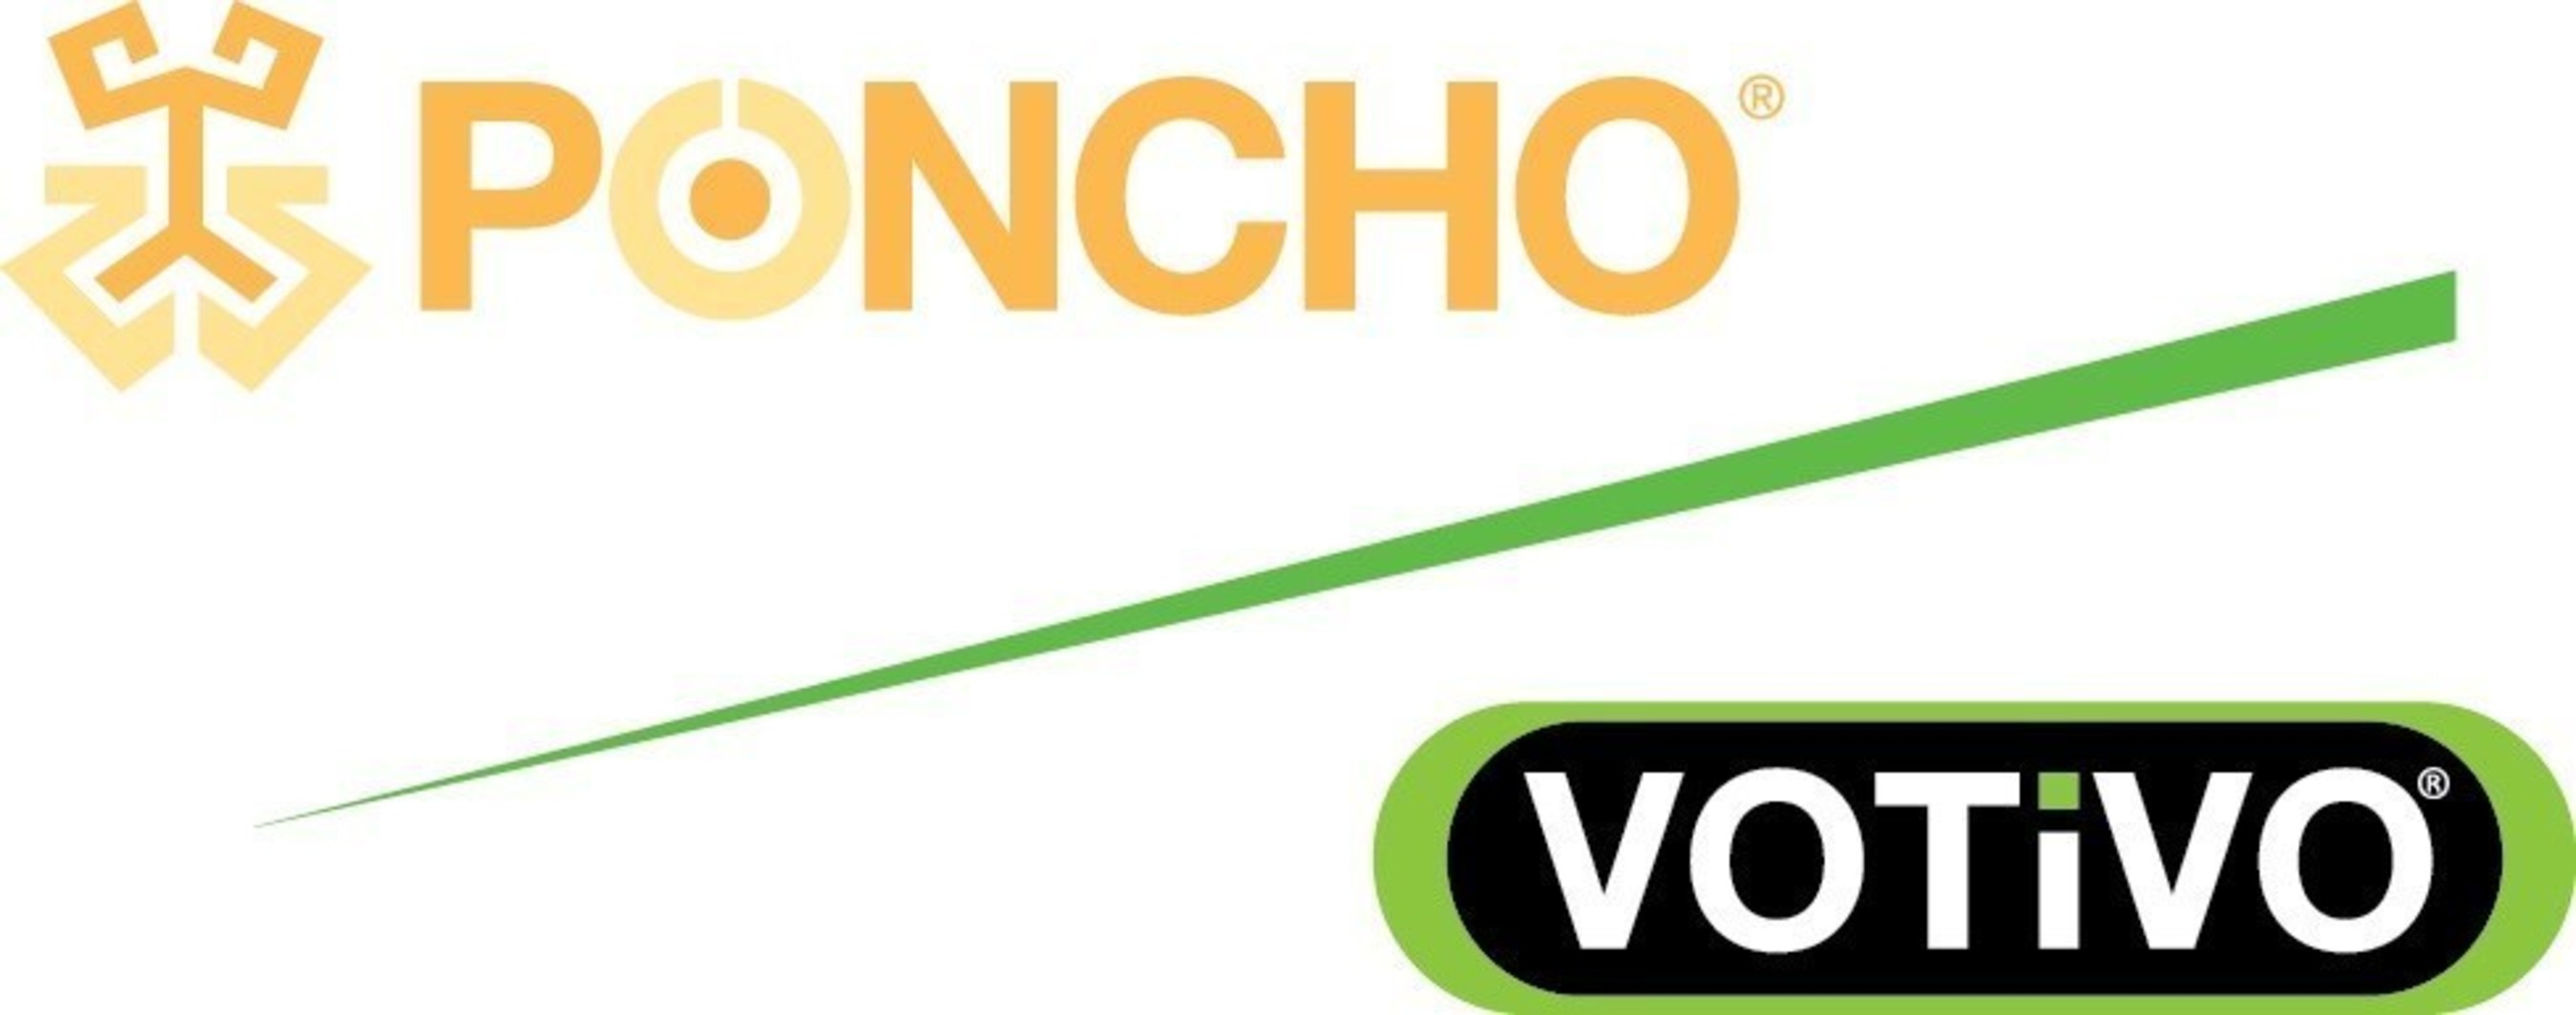 Poncho(R)/VOTiVO(R) 2.0*, the next generation of Poncho/VOTiVO, will further enhance yield potential by increasing the availability of nutrients in the soil, while still protecting young corn plants from insects and nematodes.